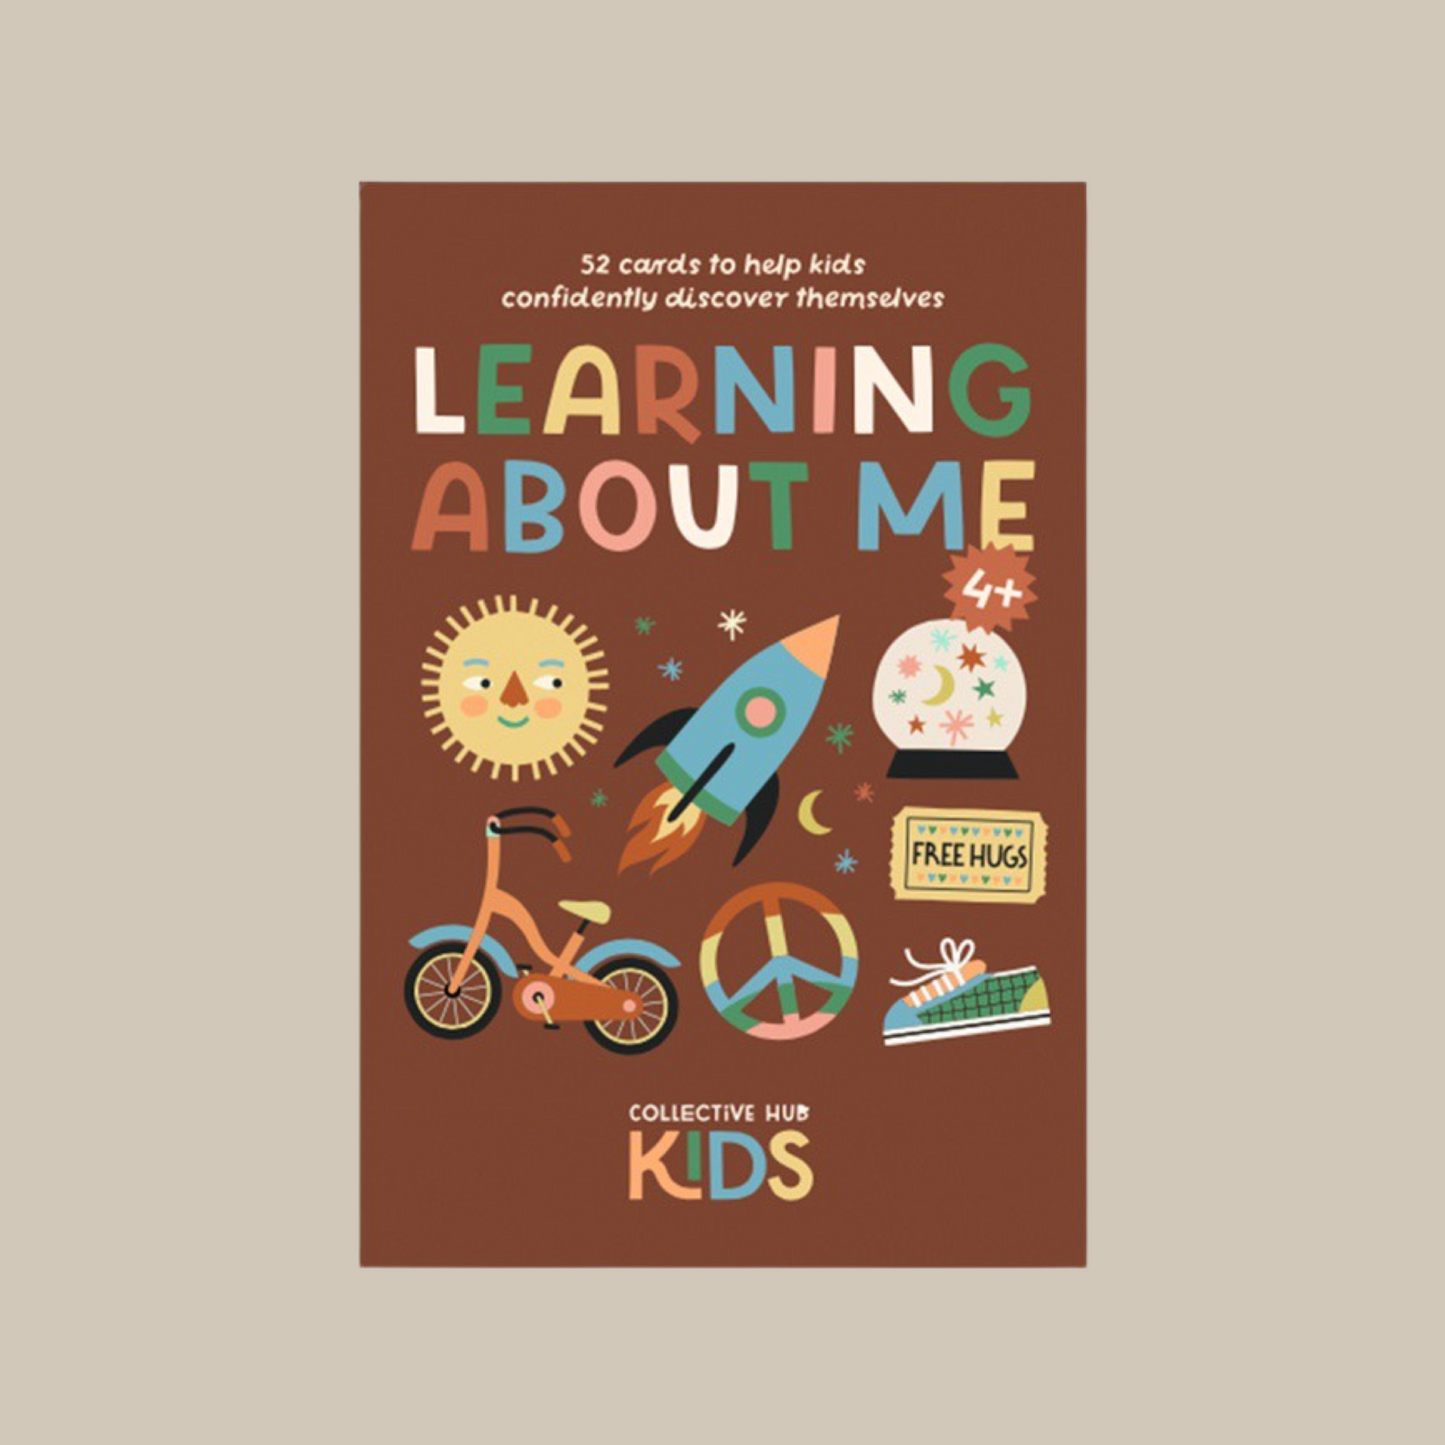 Card Deck: Learning About Me Collective Hub Kids